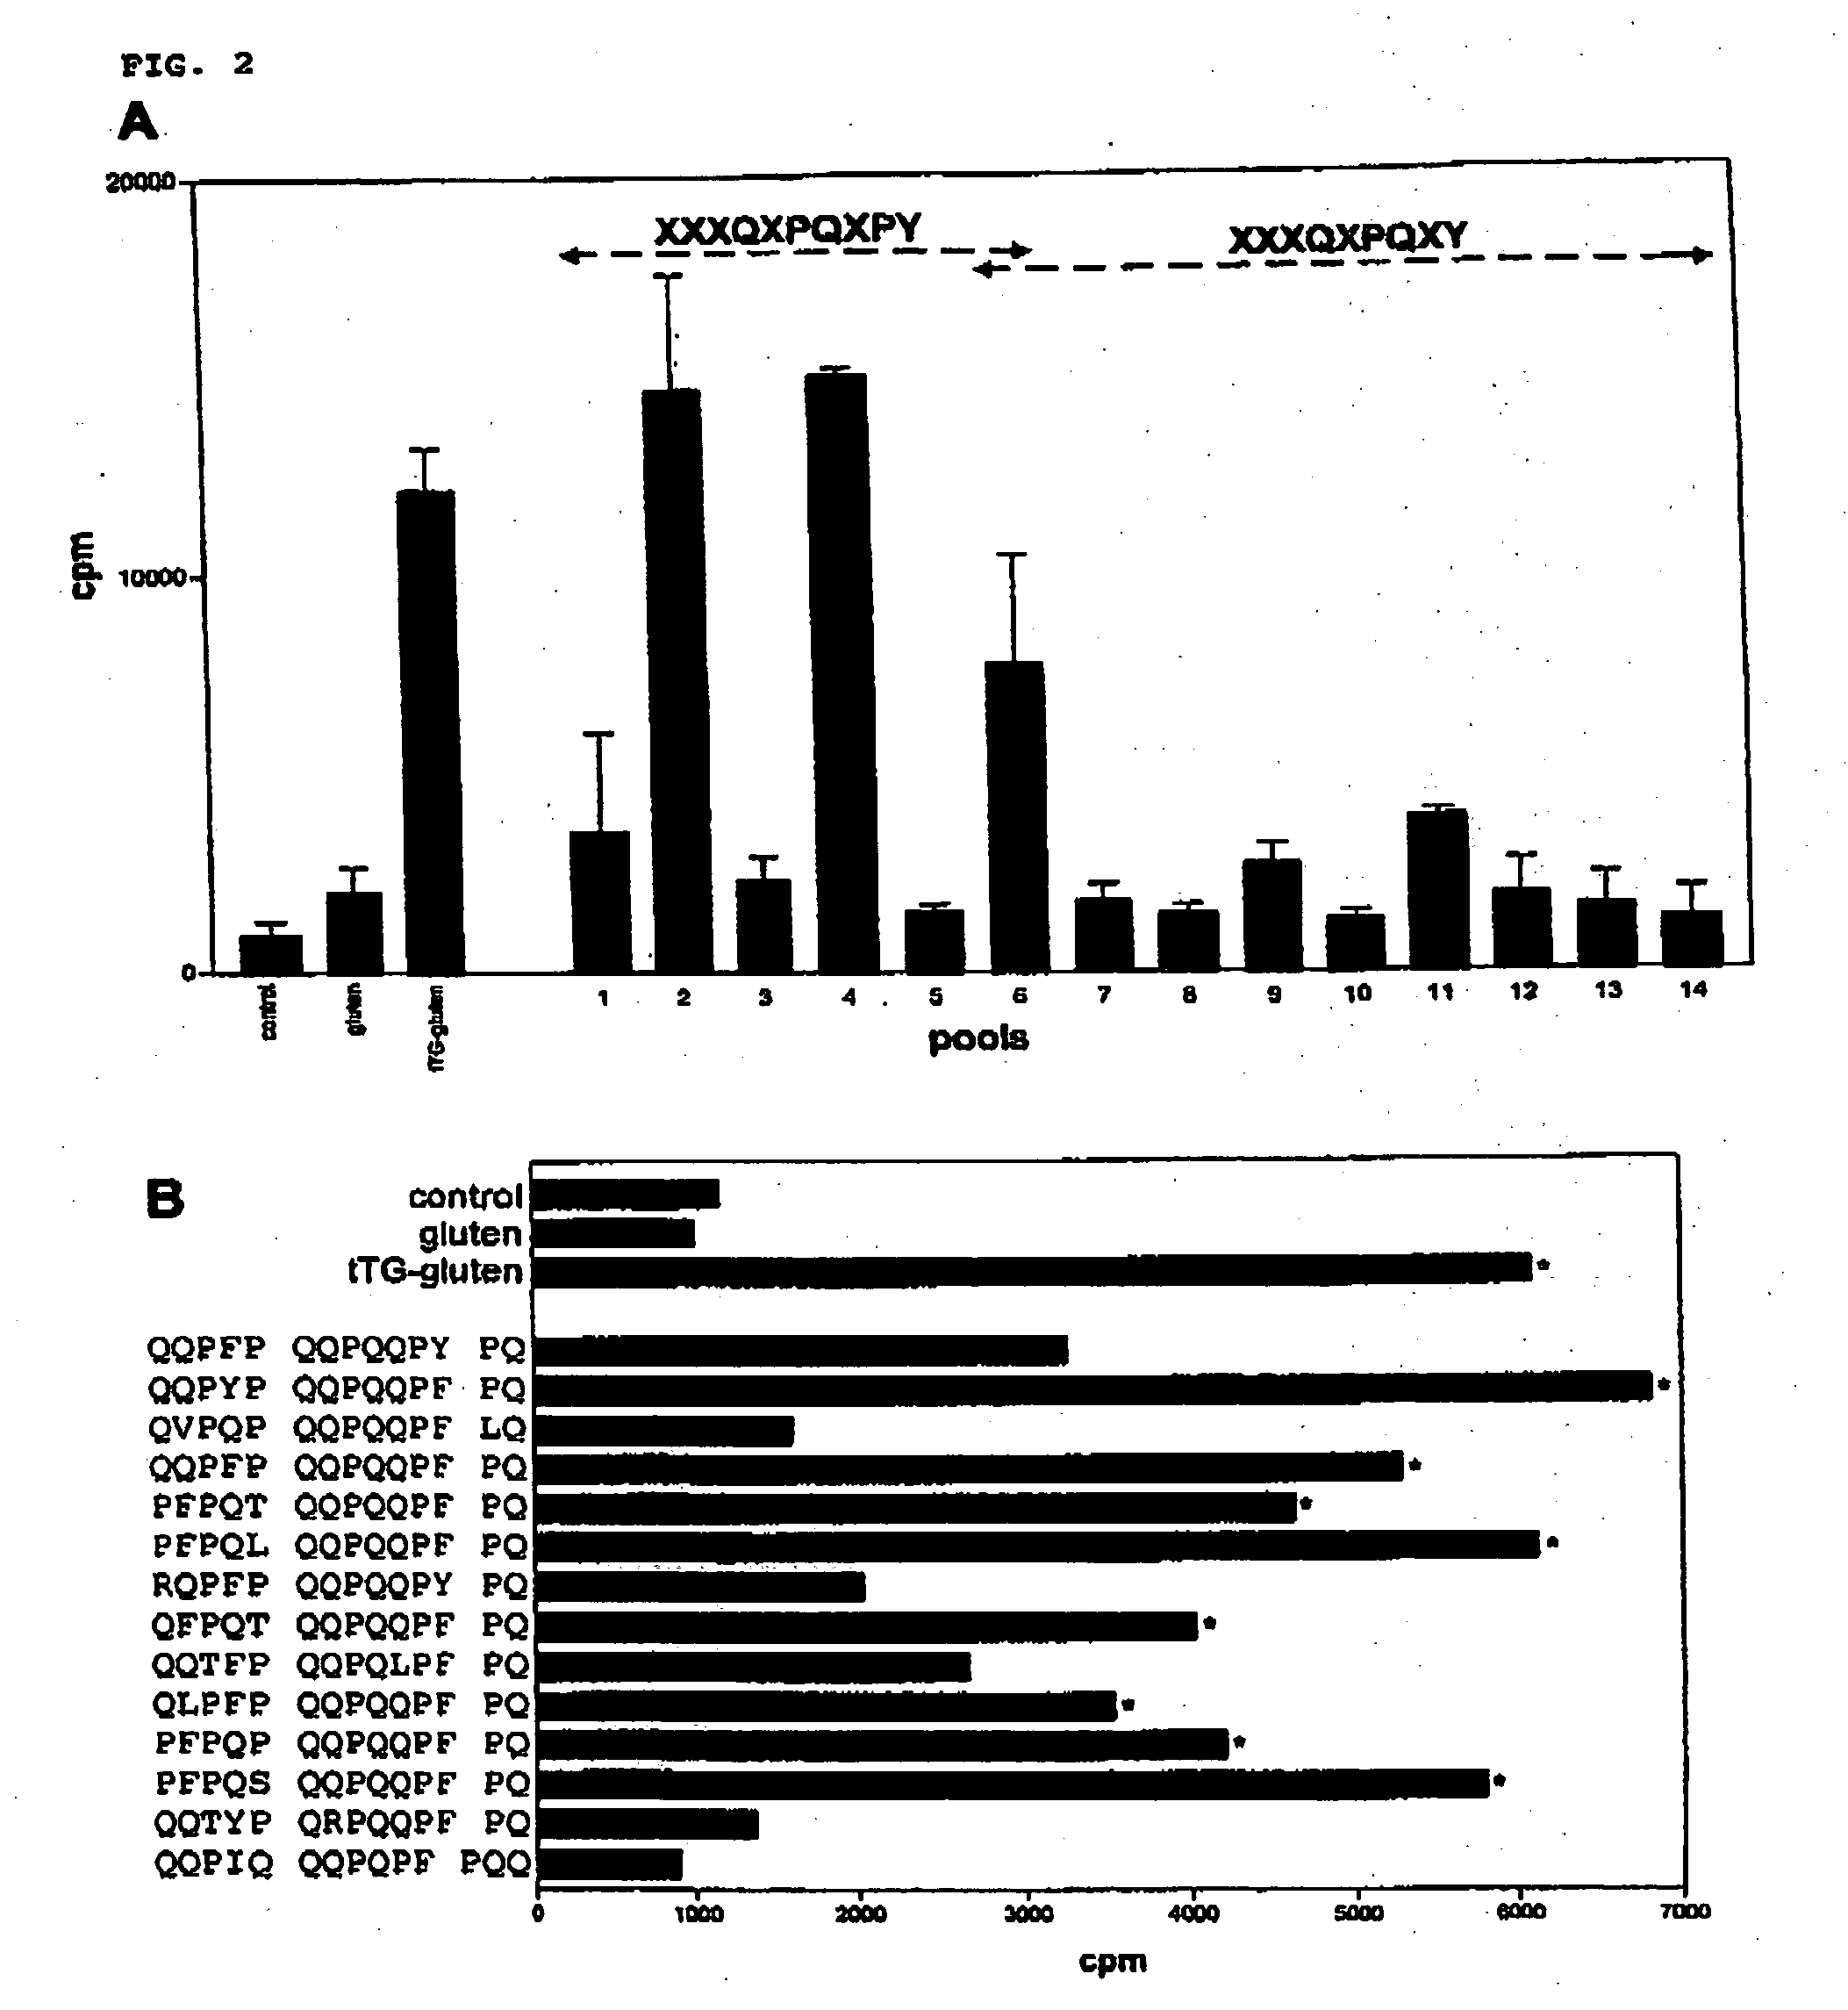 Novel epitopes for celiac disease and autoimmune diseases, methods for detecting those and novel non-antigenic food compounds